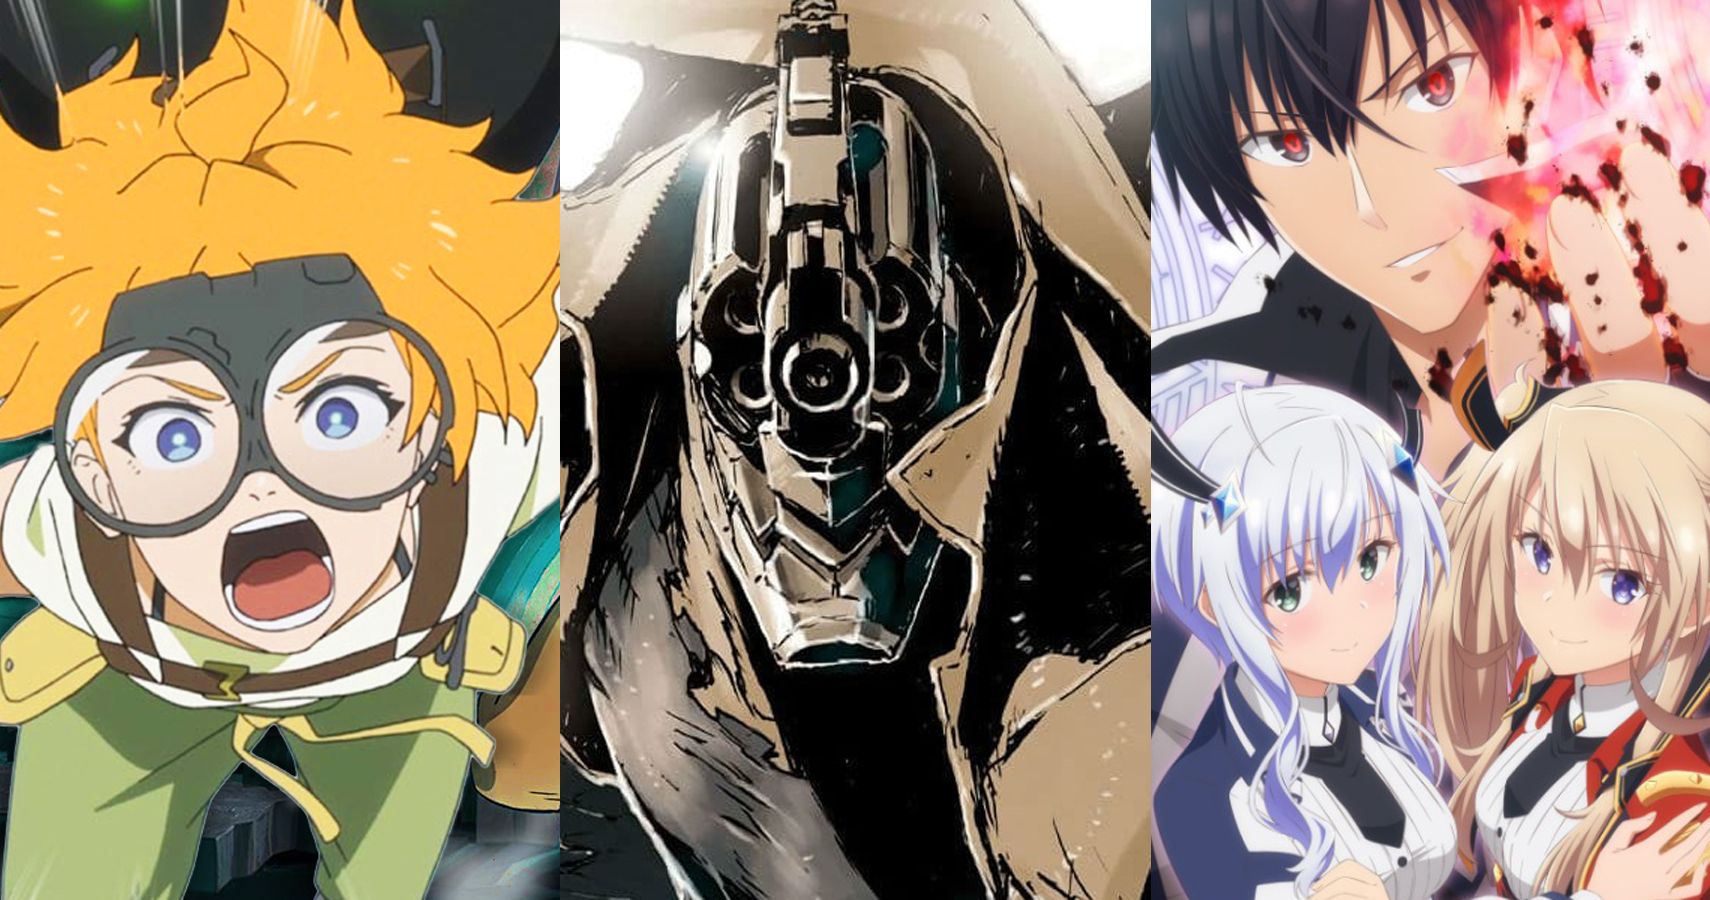 10 Highest Rated Anime Of Summer 2020 Ranked According To Myanimelist